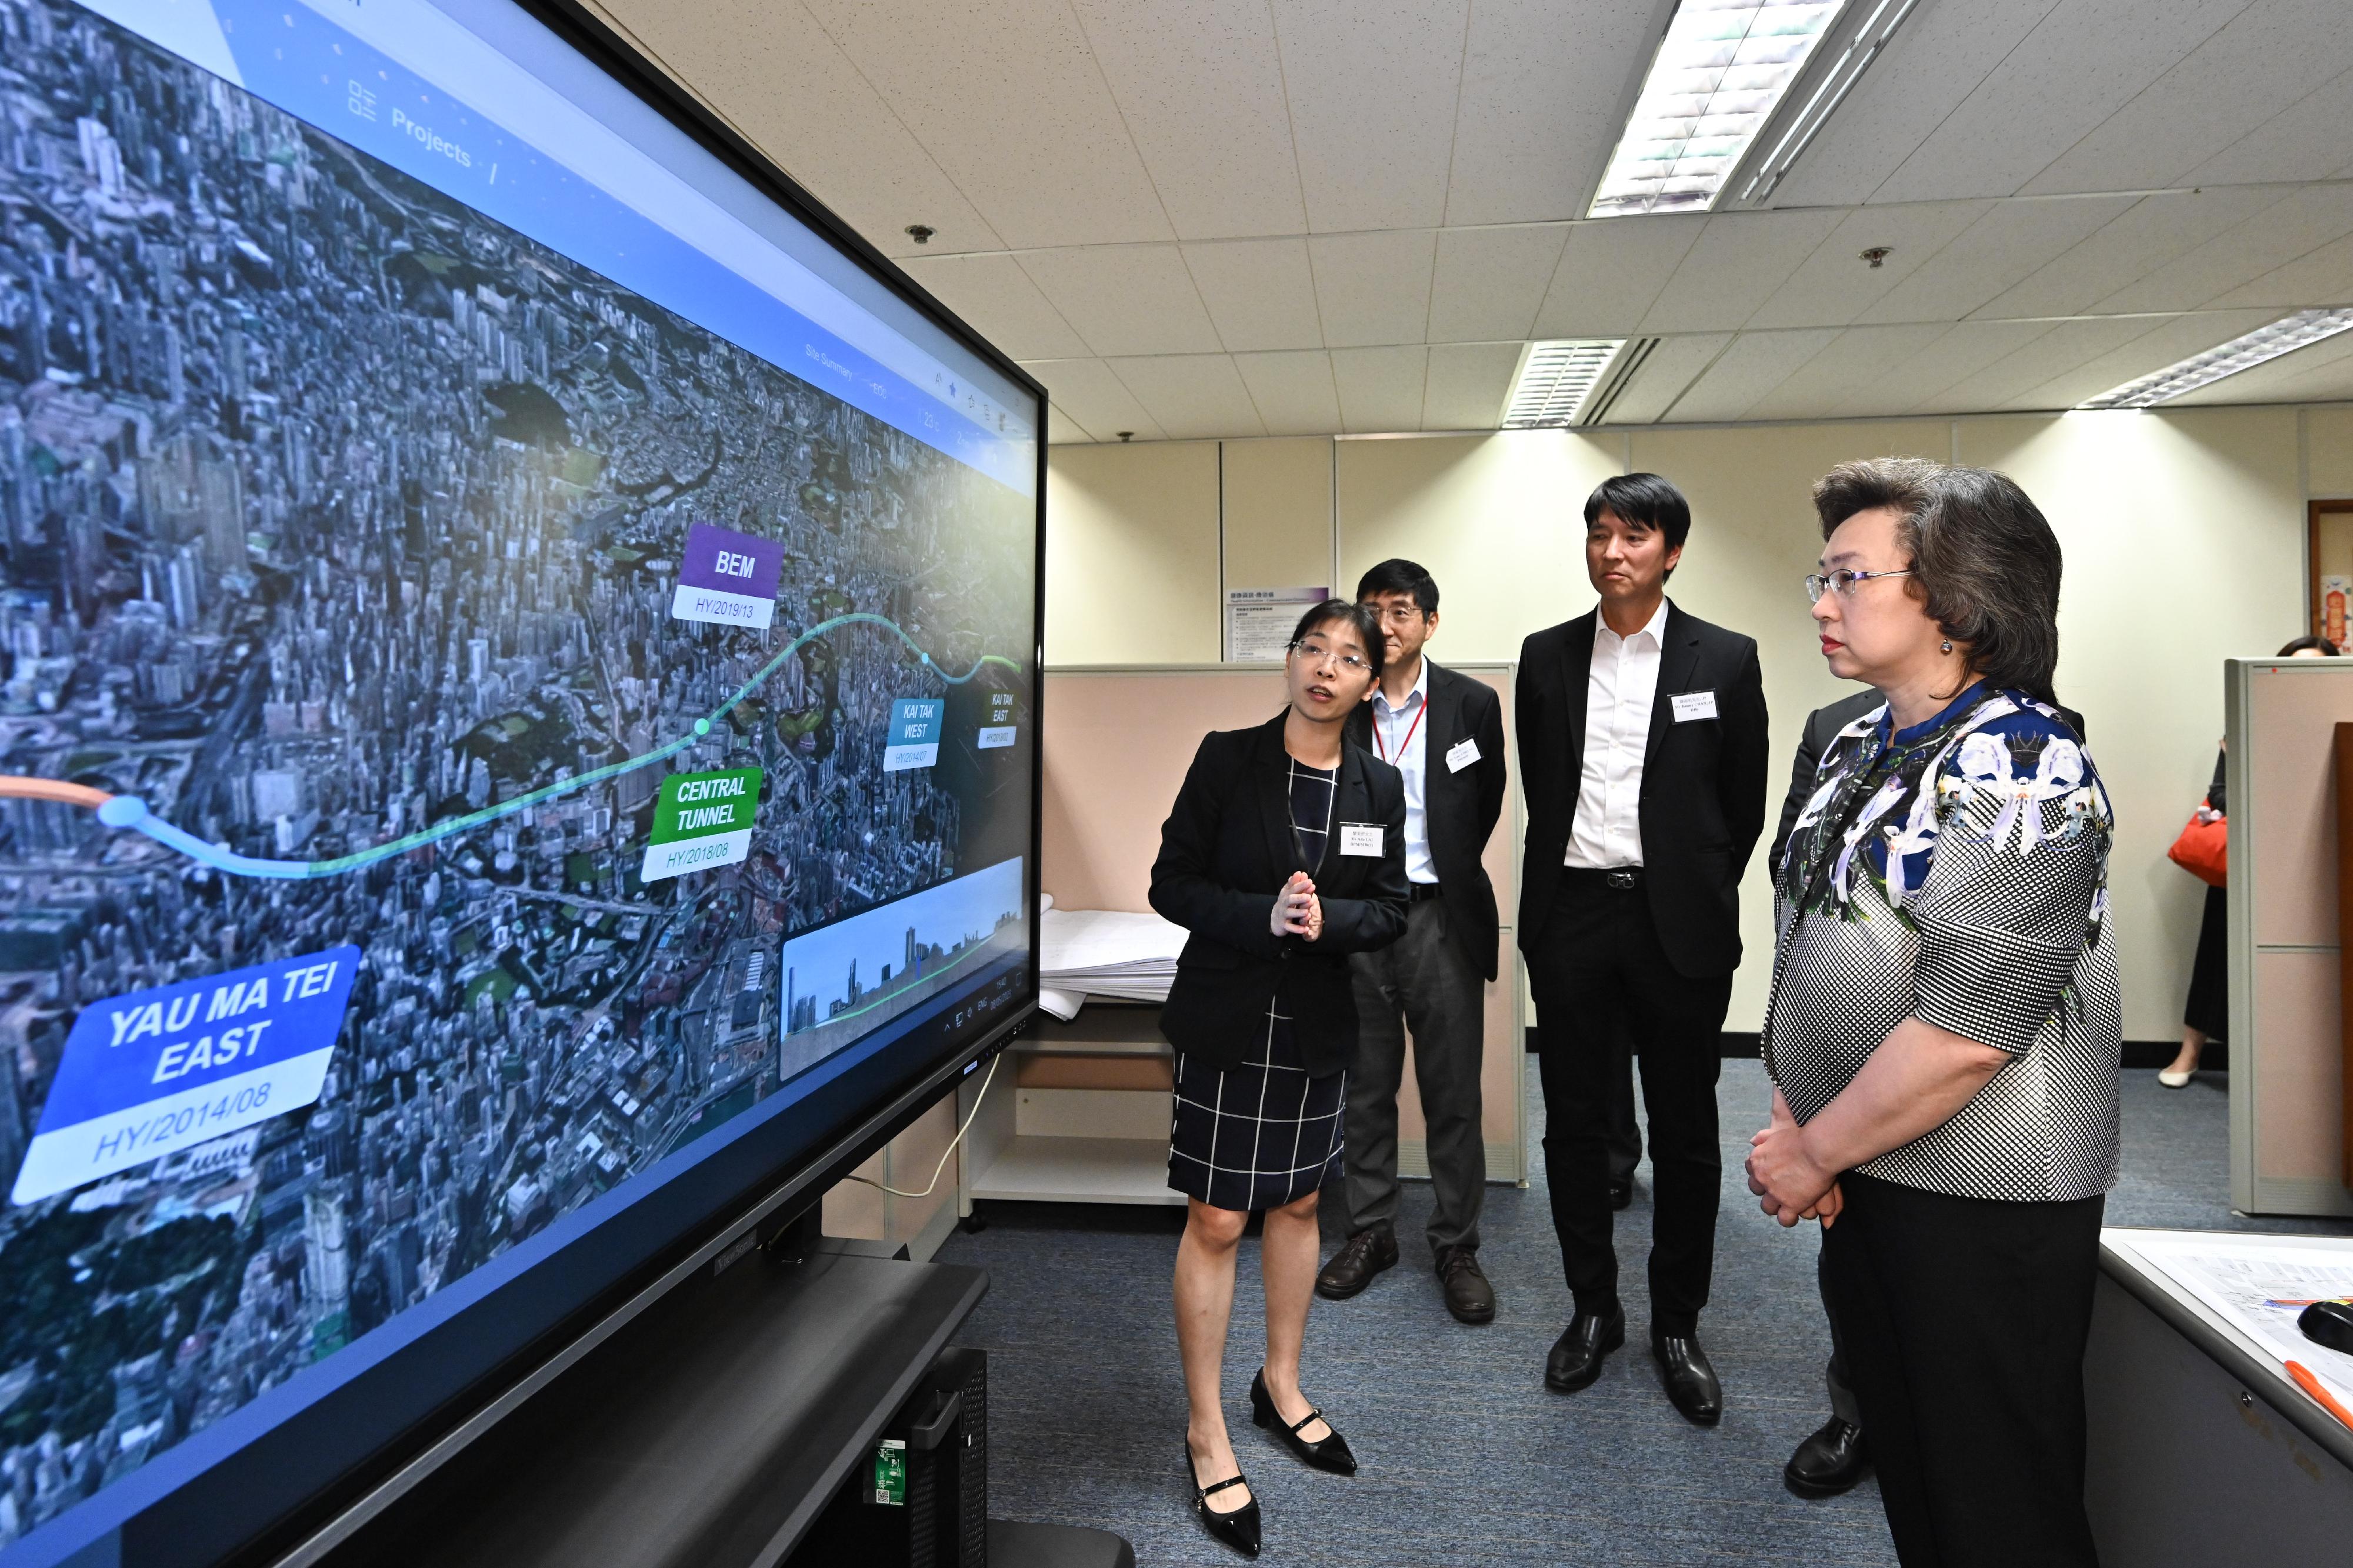 The Secretary for the Civil Service, Mrs Ingrid Yeung, visited the headquarters of the Highways Department today (May 8). Photo shows Mrs Yeung (first right) being briefed by a staff member of the Major Works Project Management Office on the Smart Site Management Hub developed under the Central Kowloon Route project. Looking on is the Director of Highways, Mr Jimmy Chan (second right).